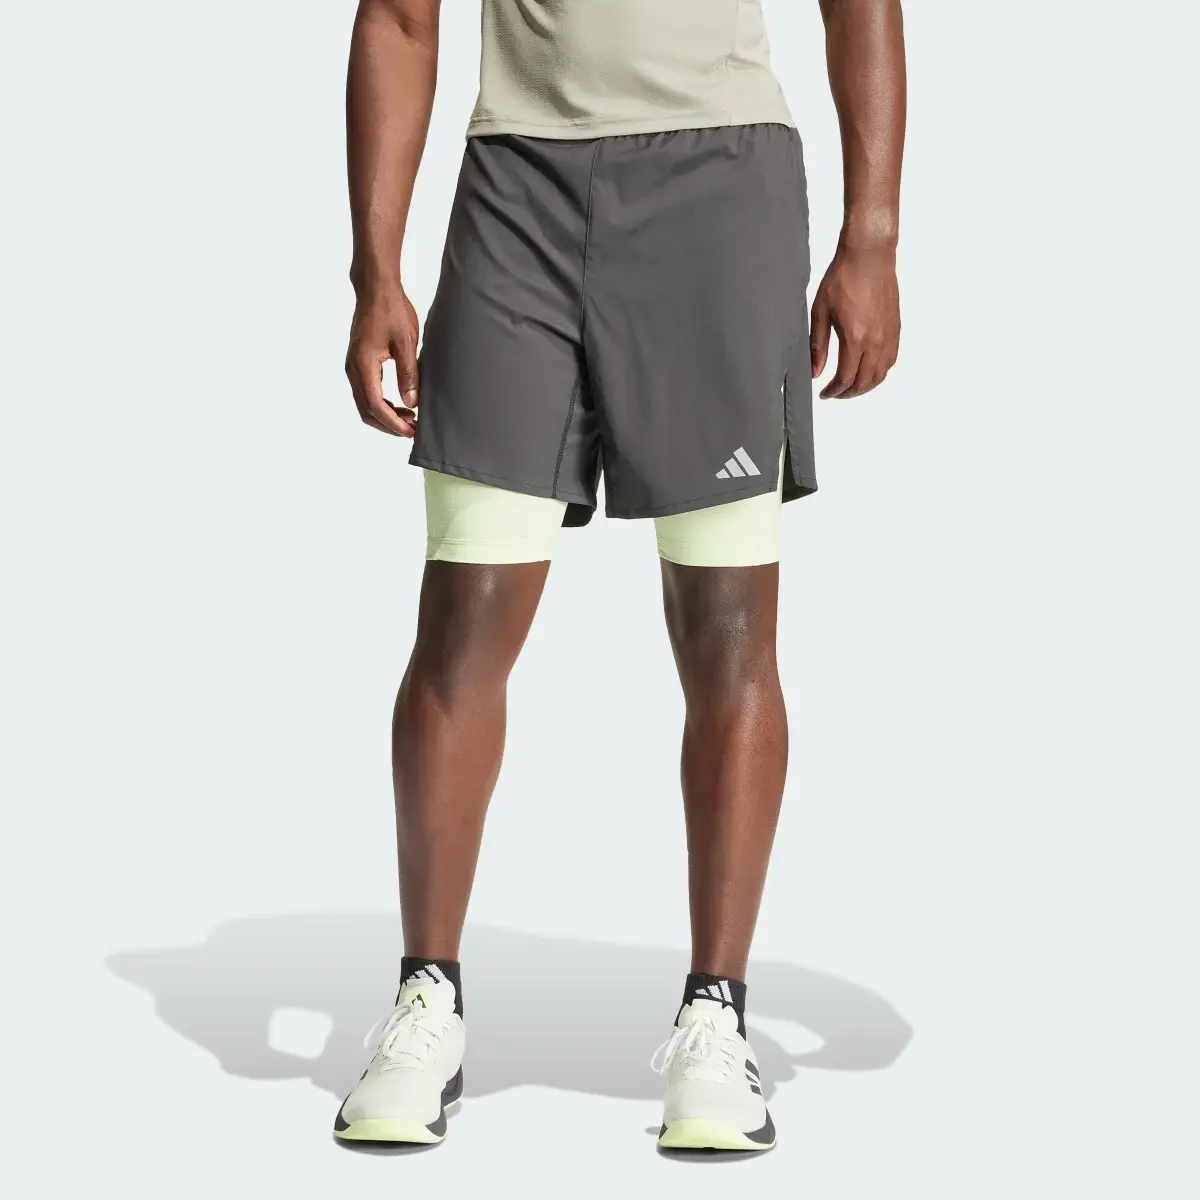 Adidas HIIT Workout HEAT.RDY 2-in-1 Shorts. 1